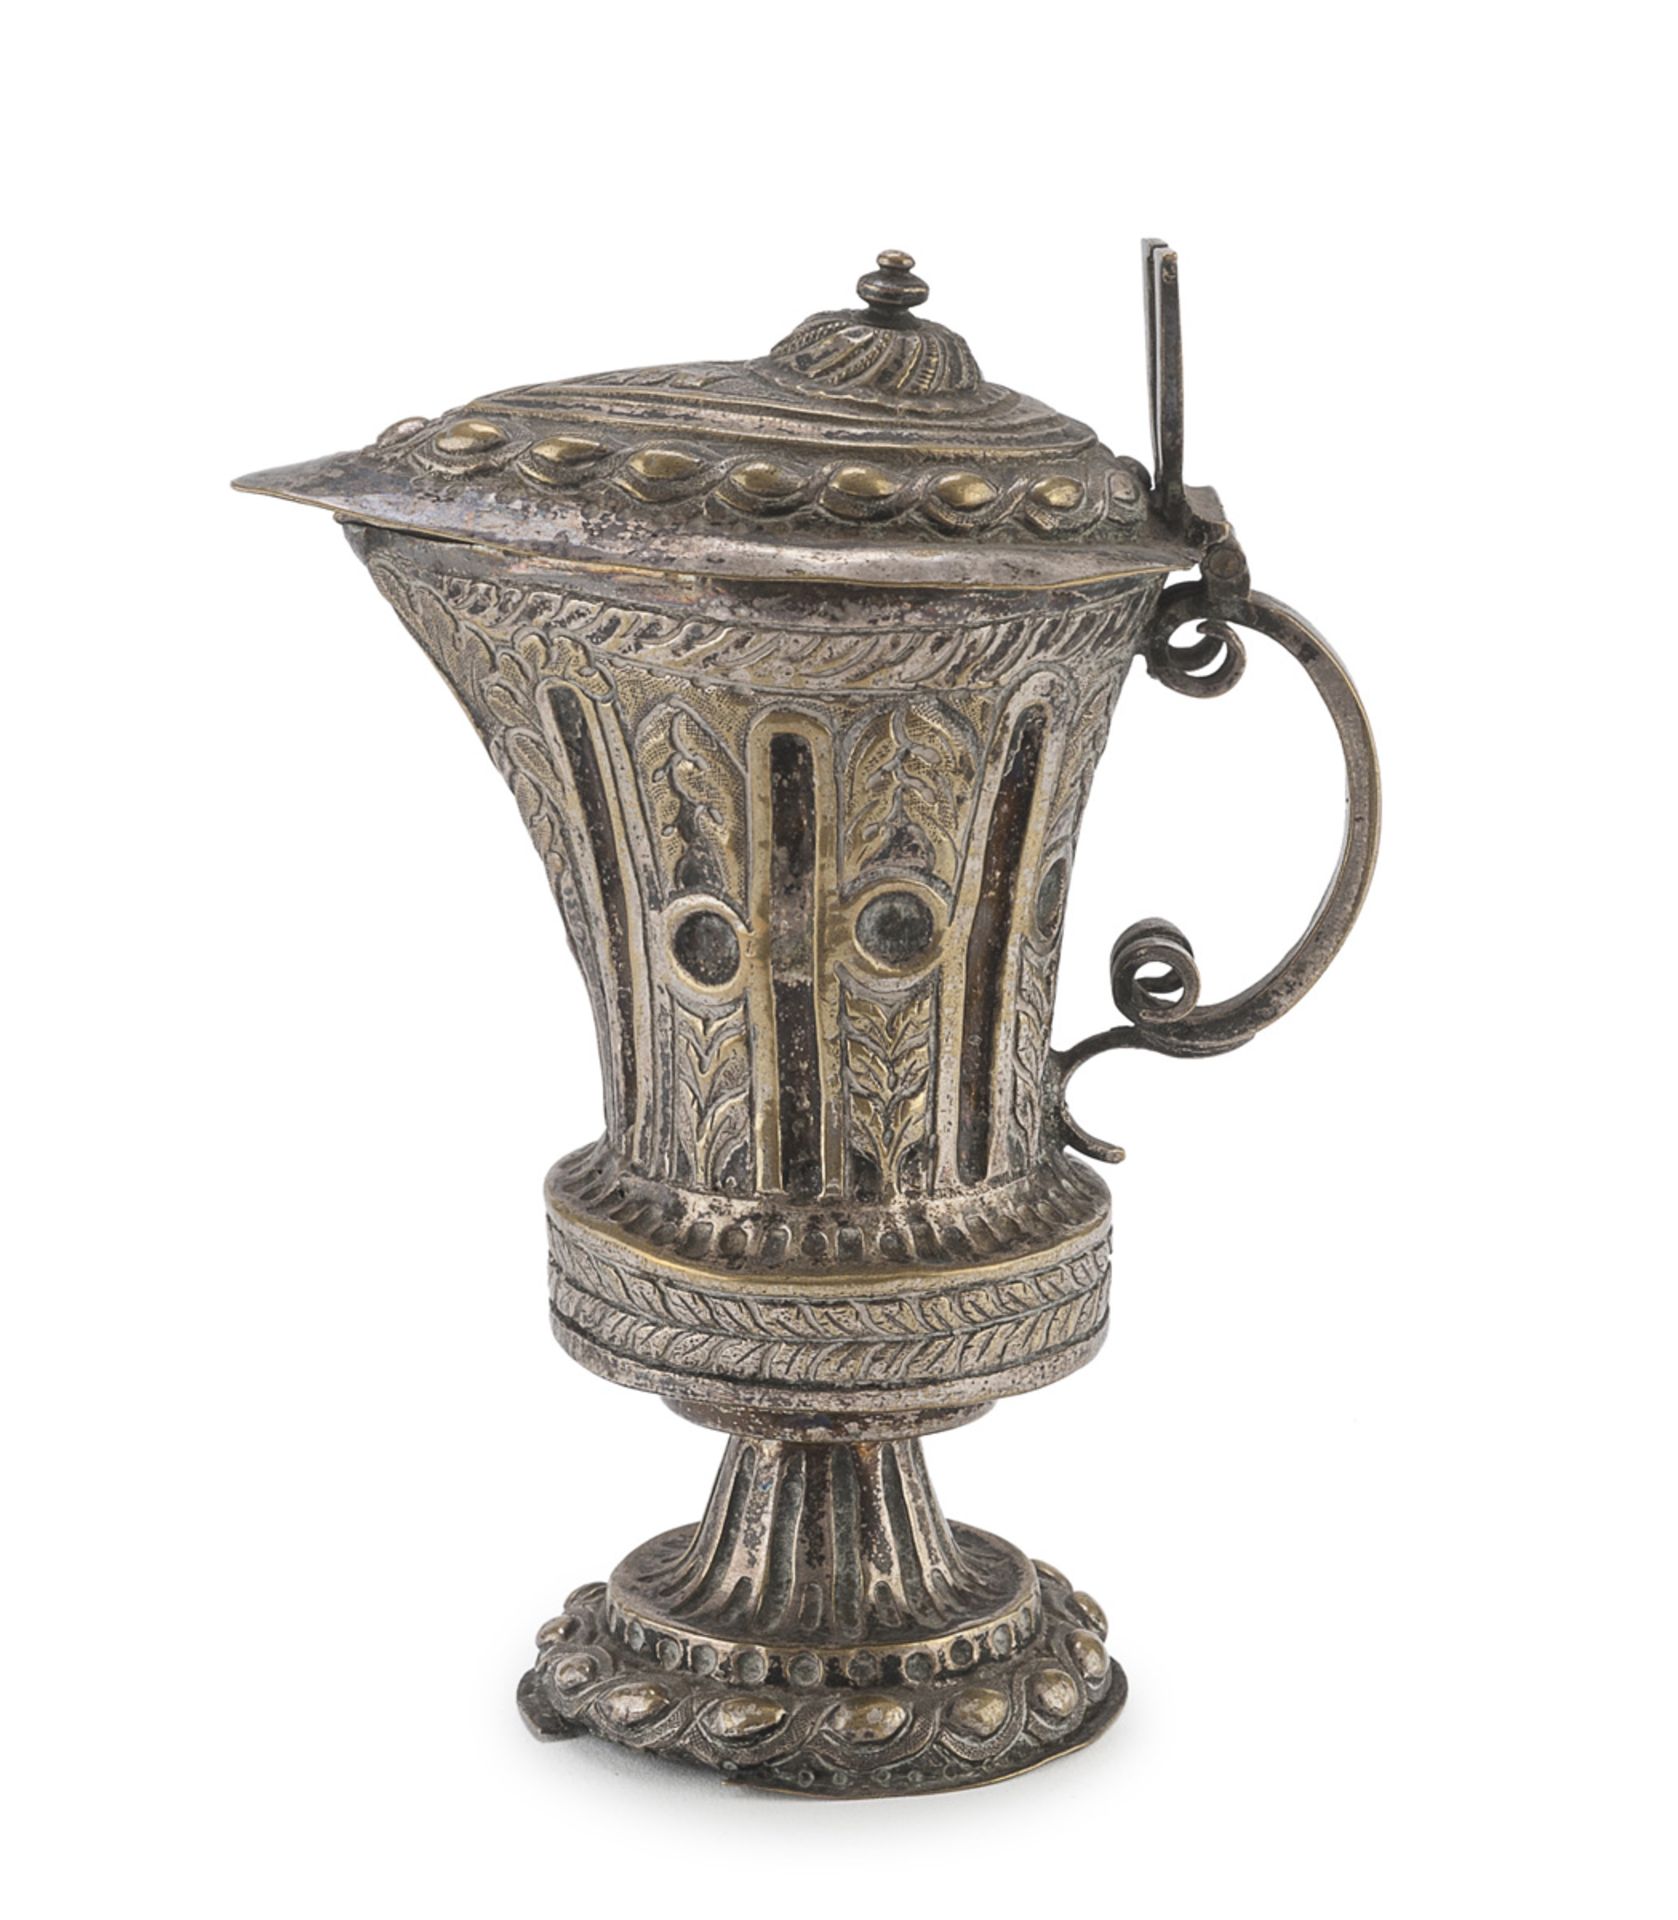 SMALL SILVER-PLATED PITCHER OF THE 18TH CENTURY